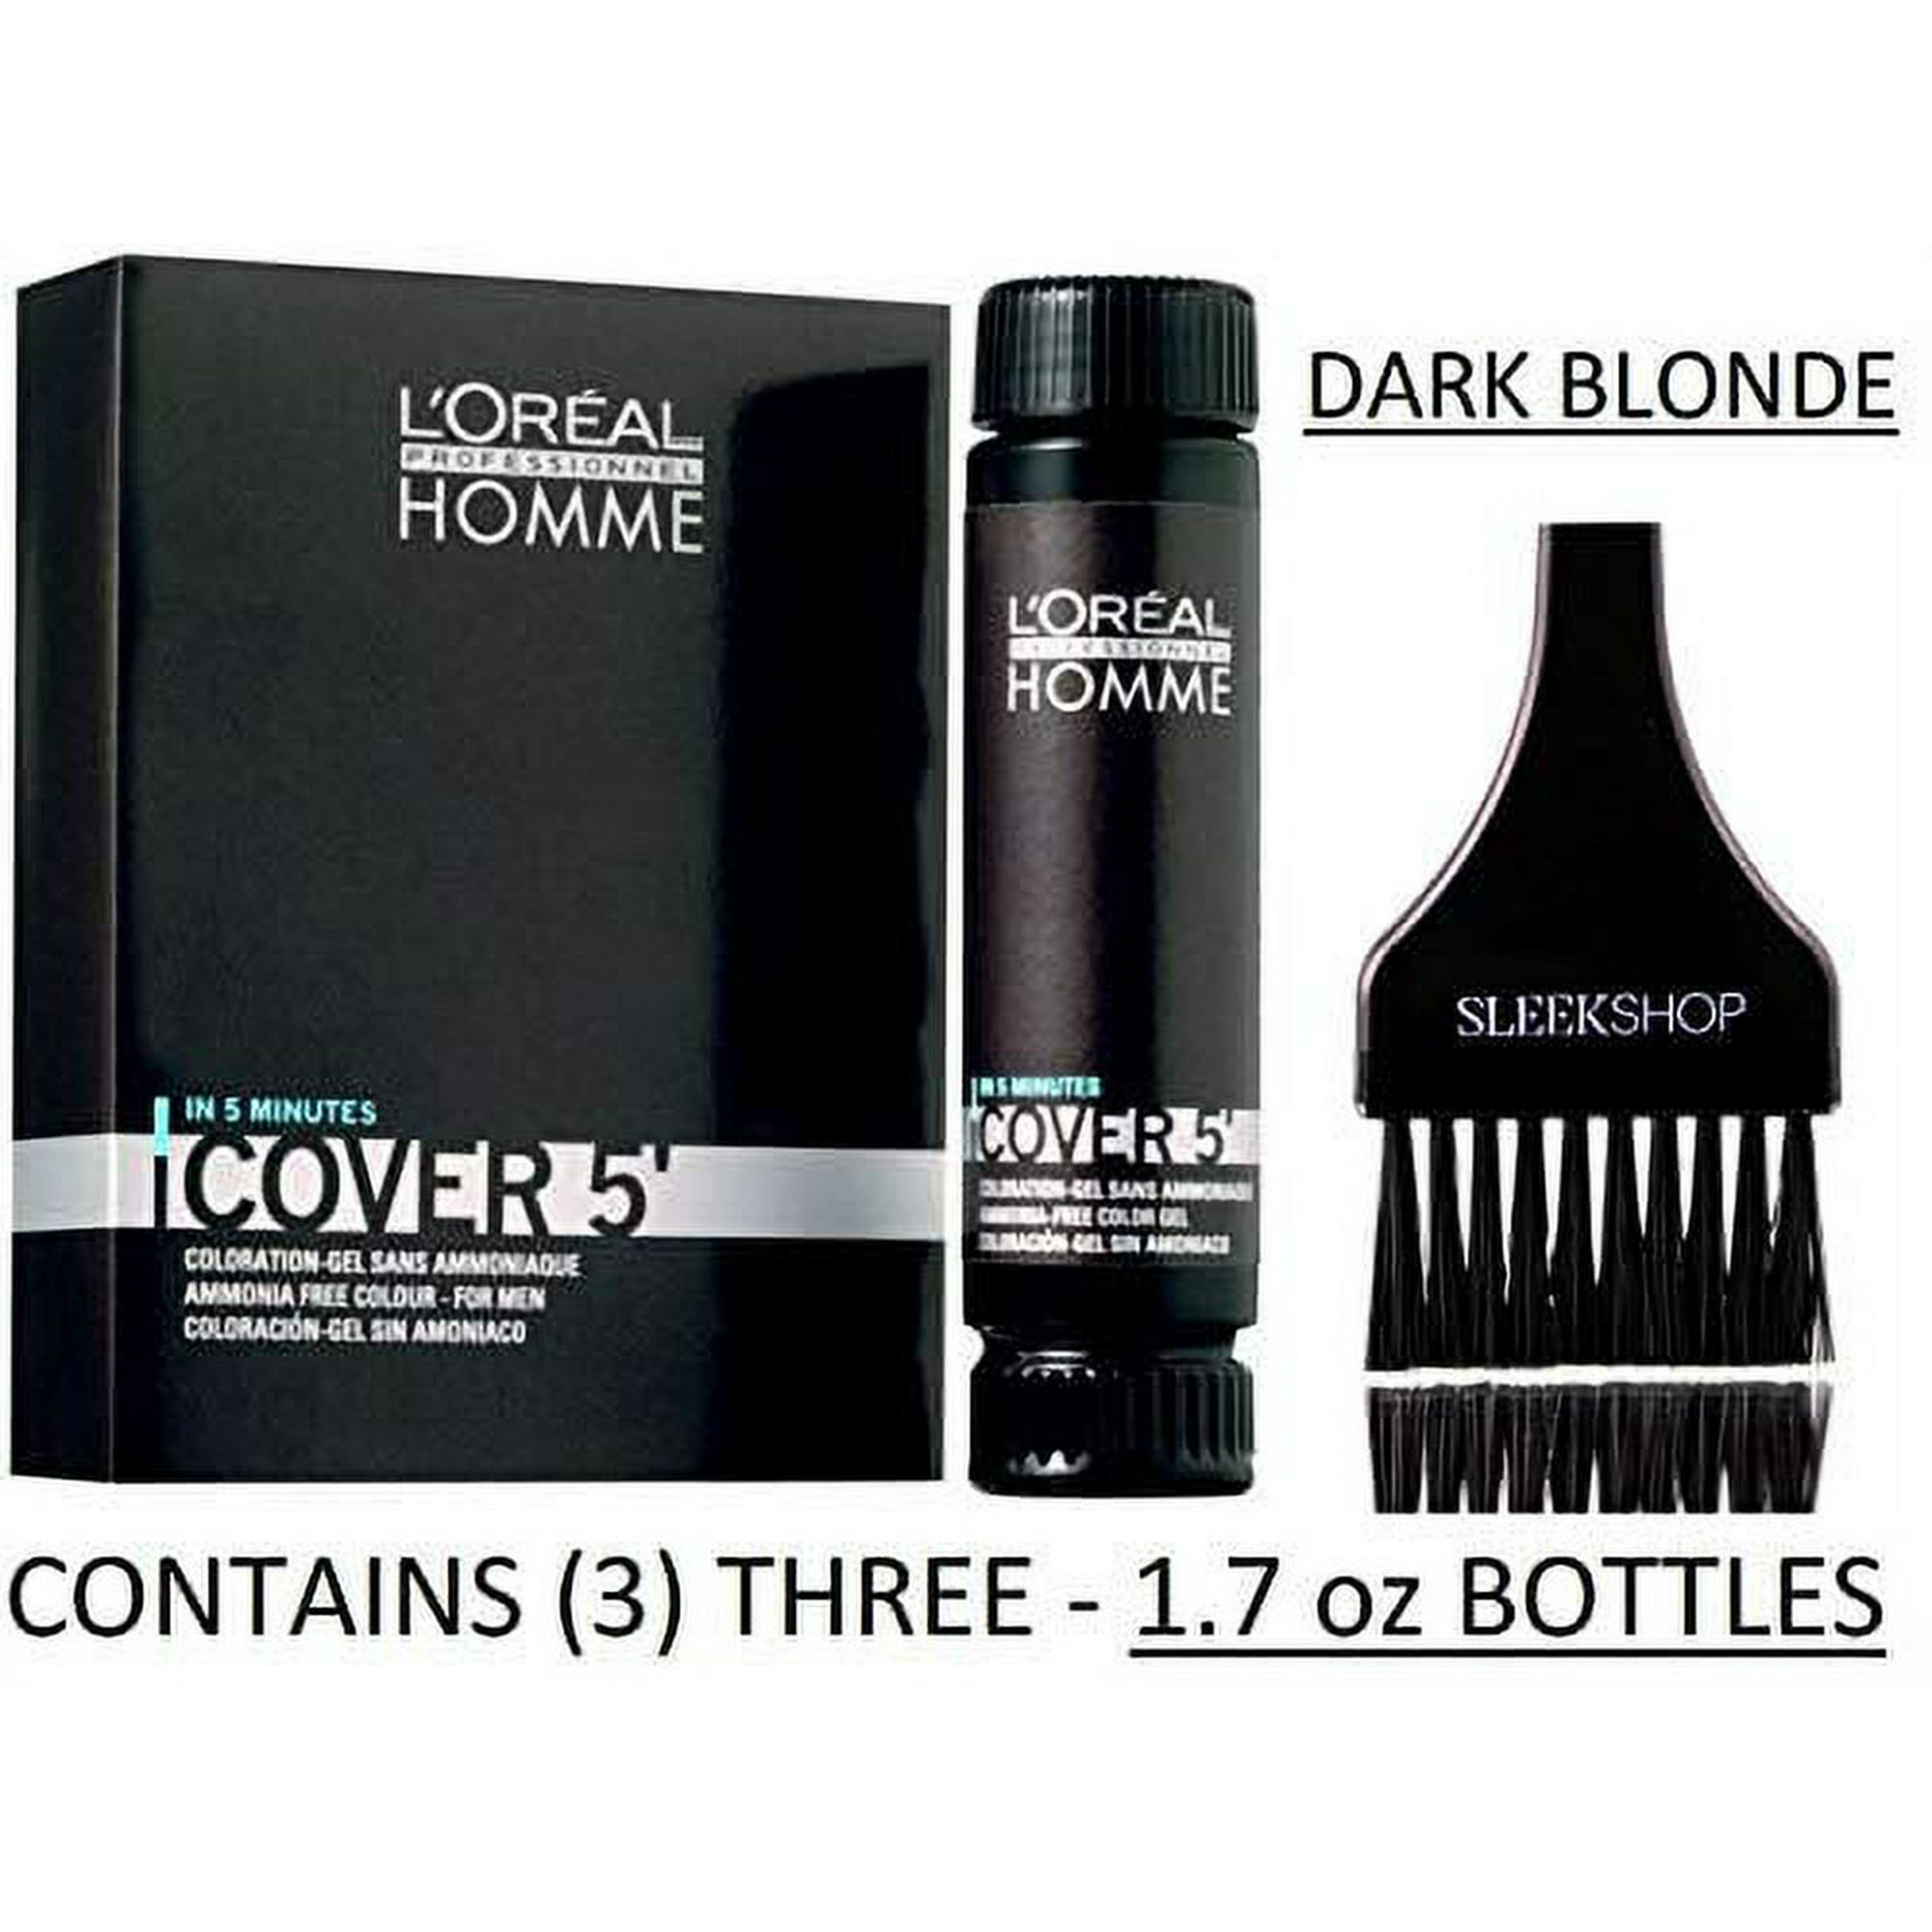 Loreal homme. Loreal homme Cover 5. L'Oreal for men тонирующая краска.